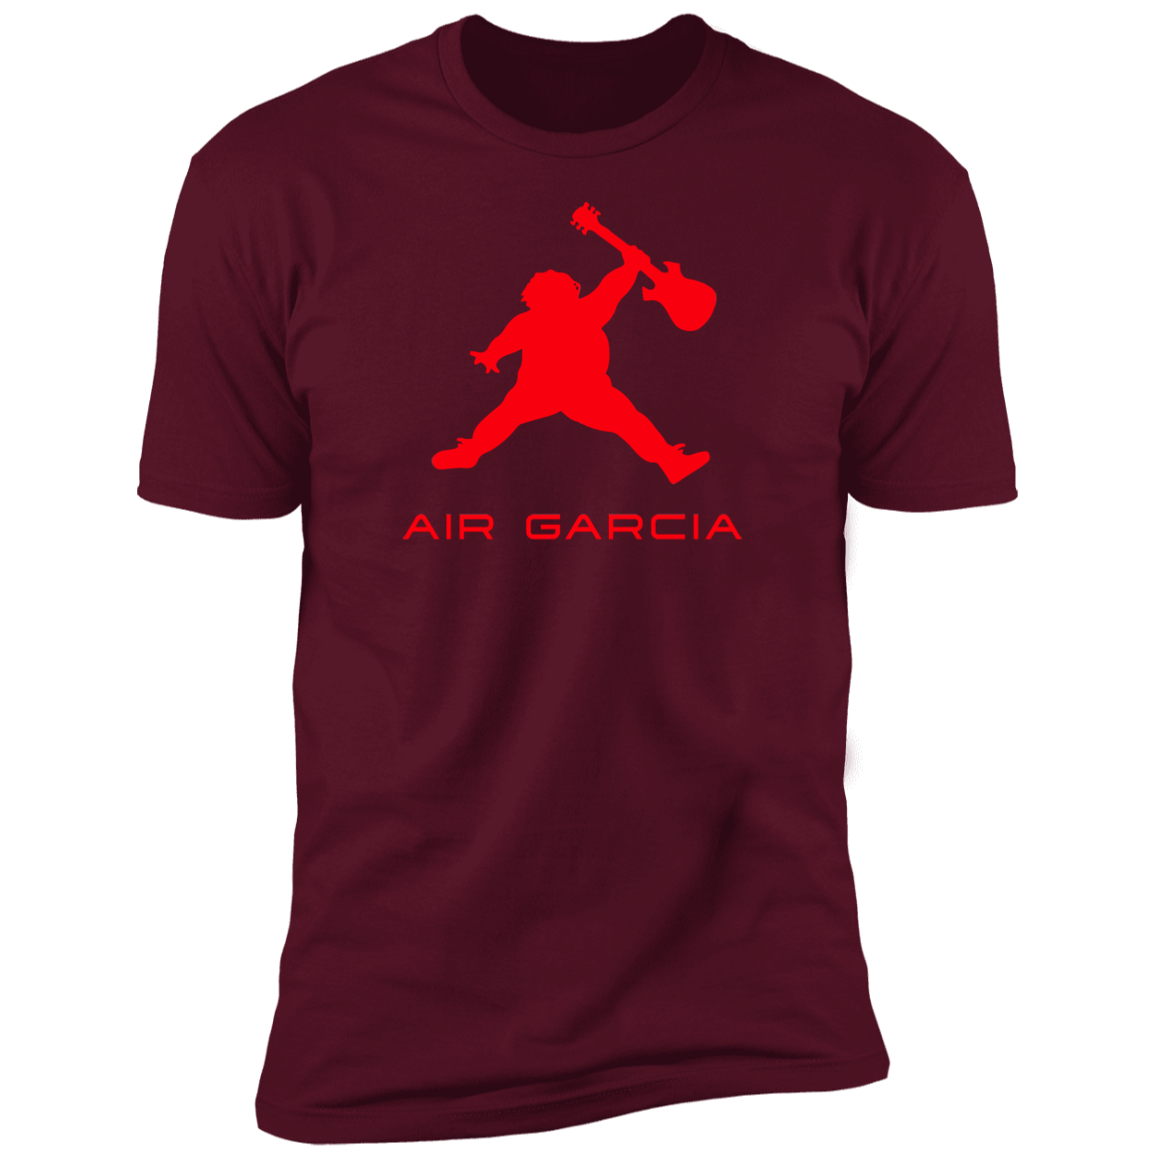 Air Garcia, Grateful TRAP inspired The KIT – T-shirt The